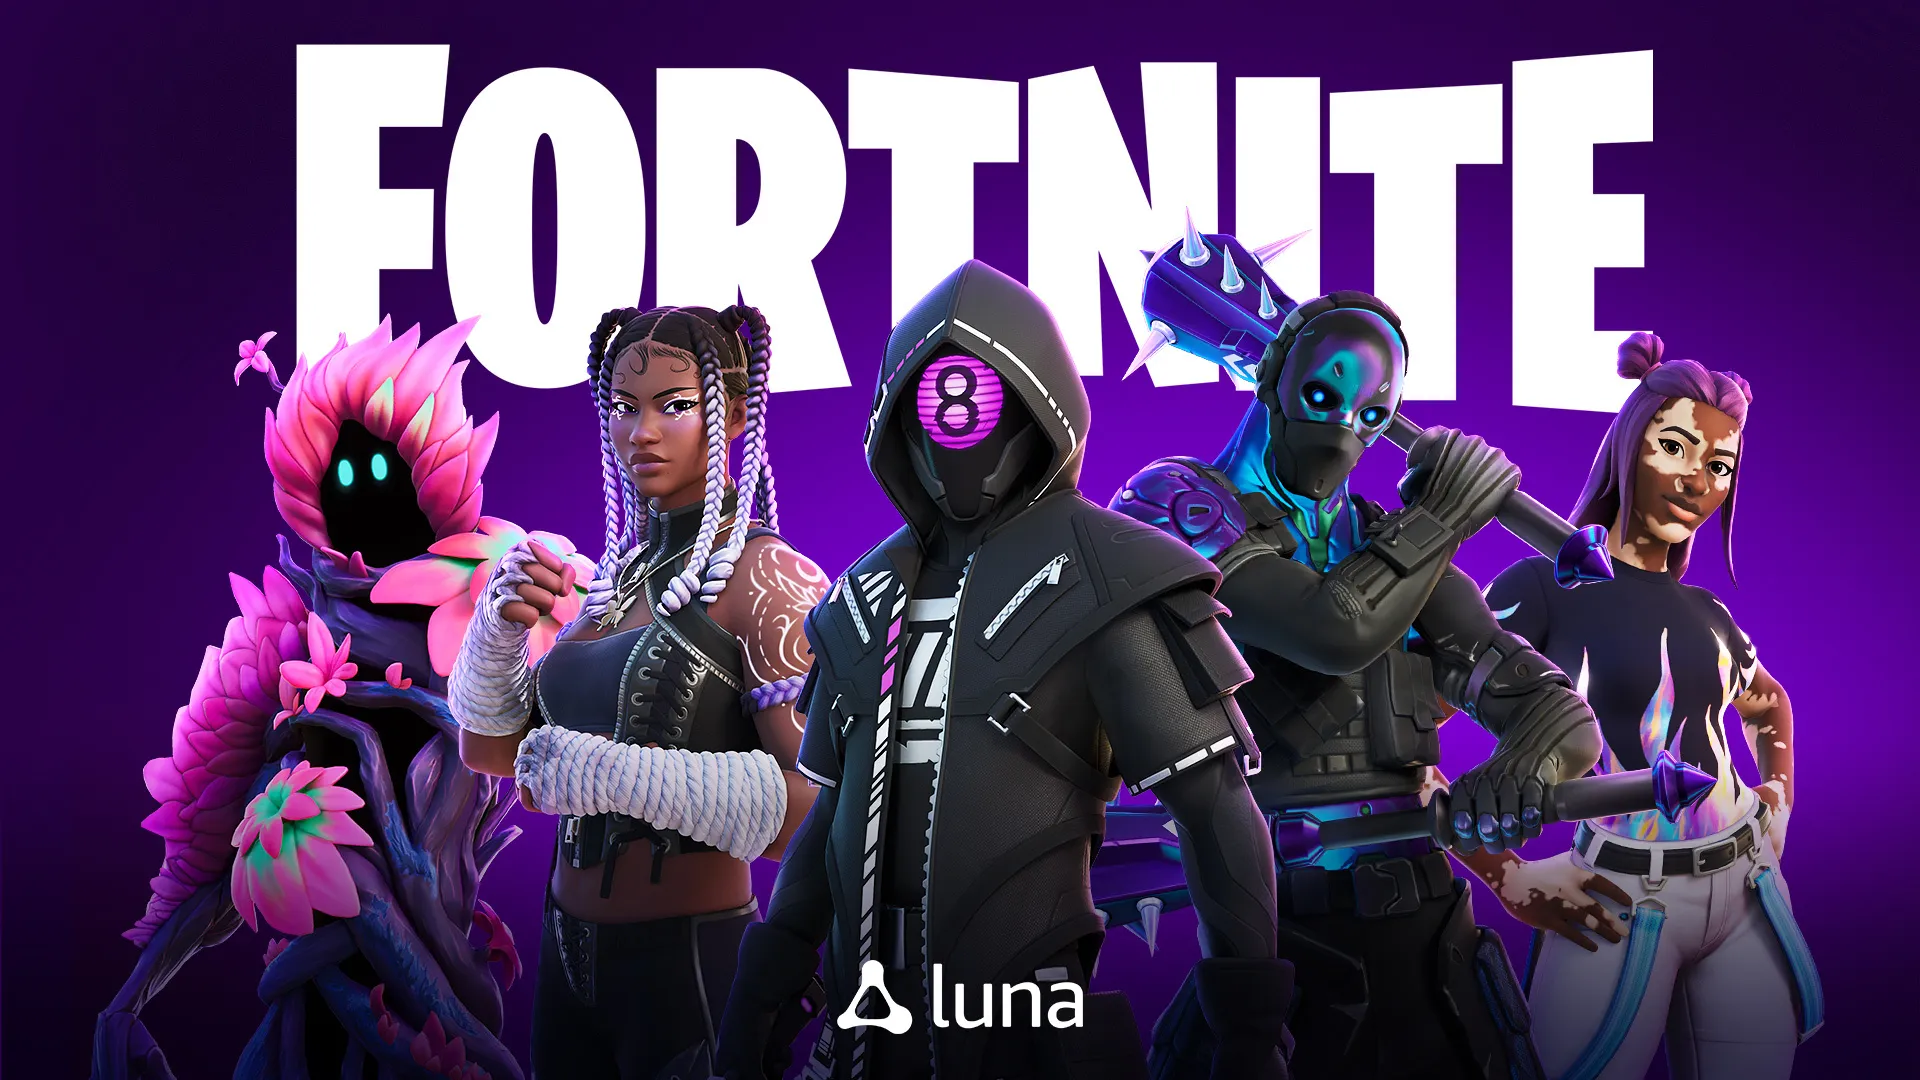 Fortnite is Now Available on Amazon’s Fire TV & Amazon Luna